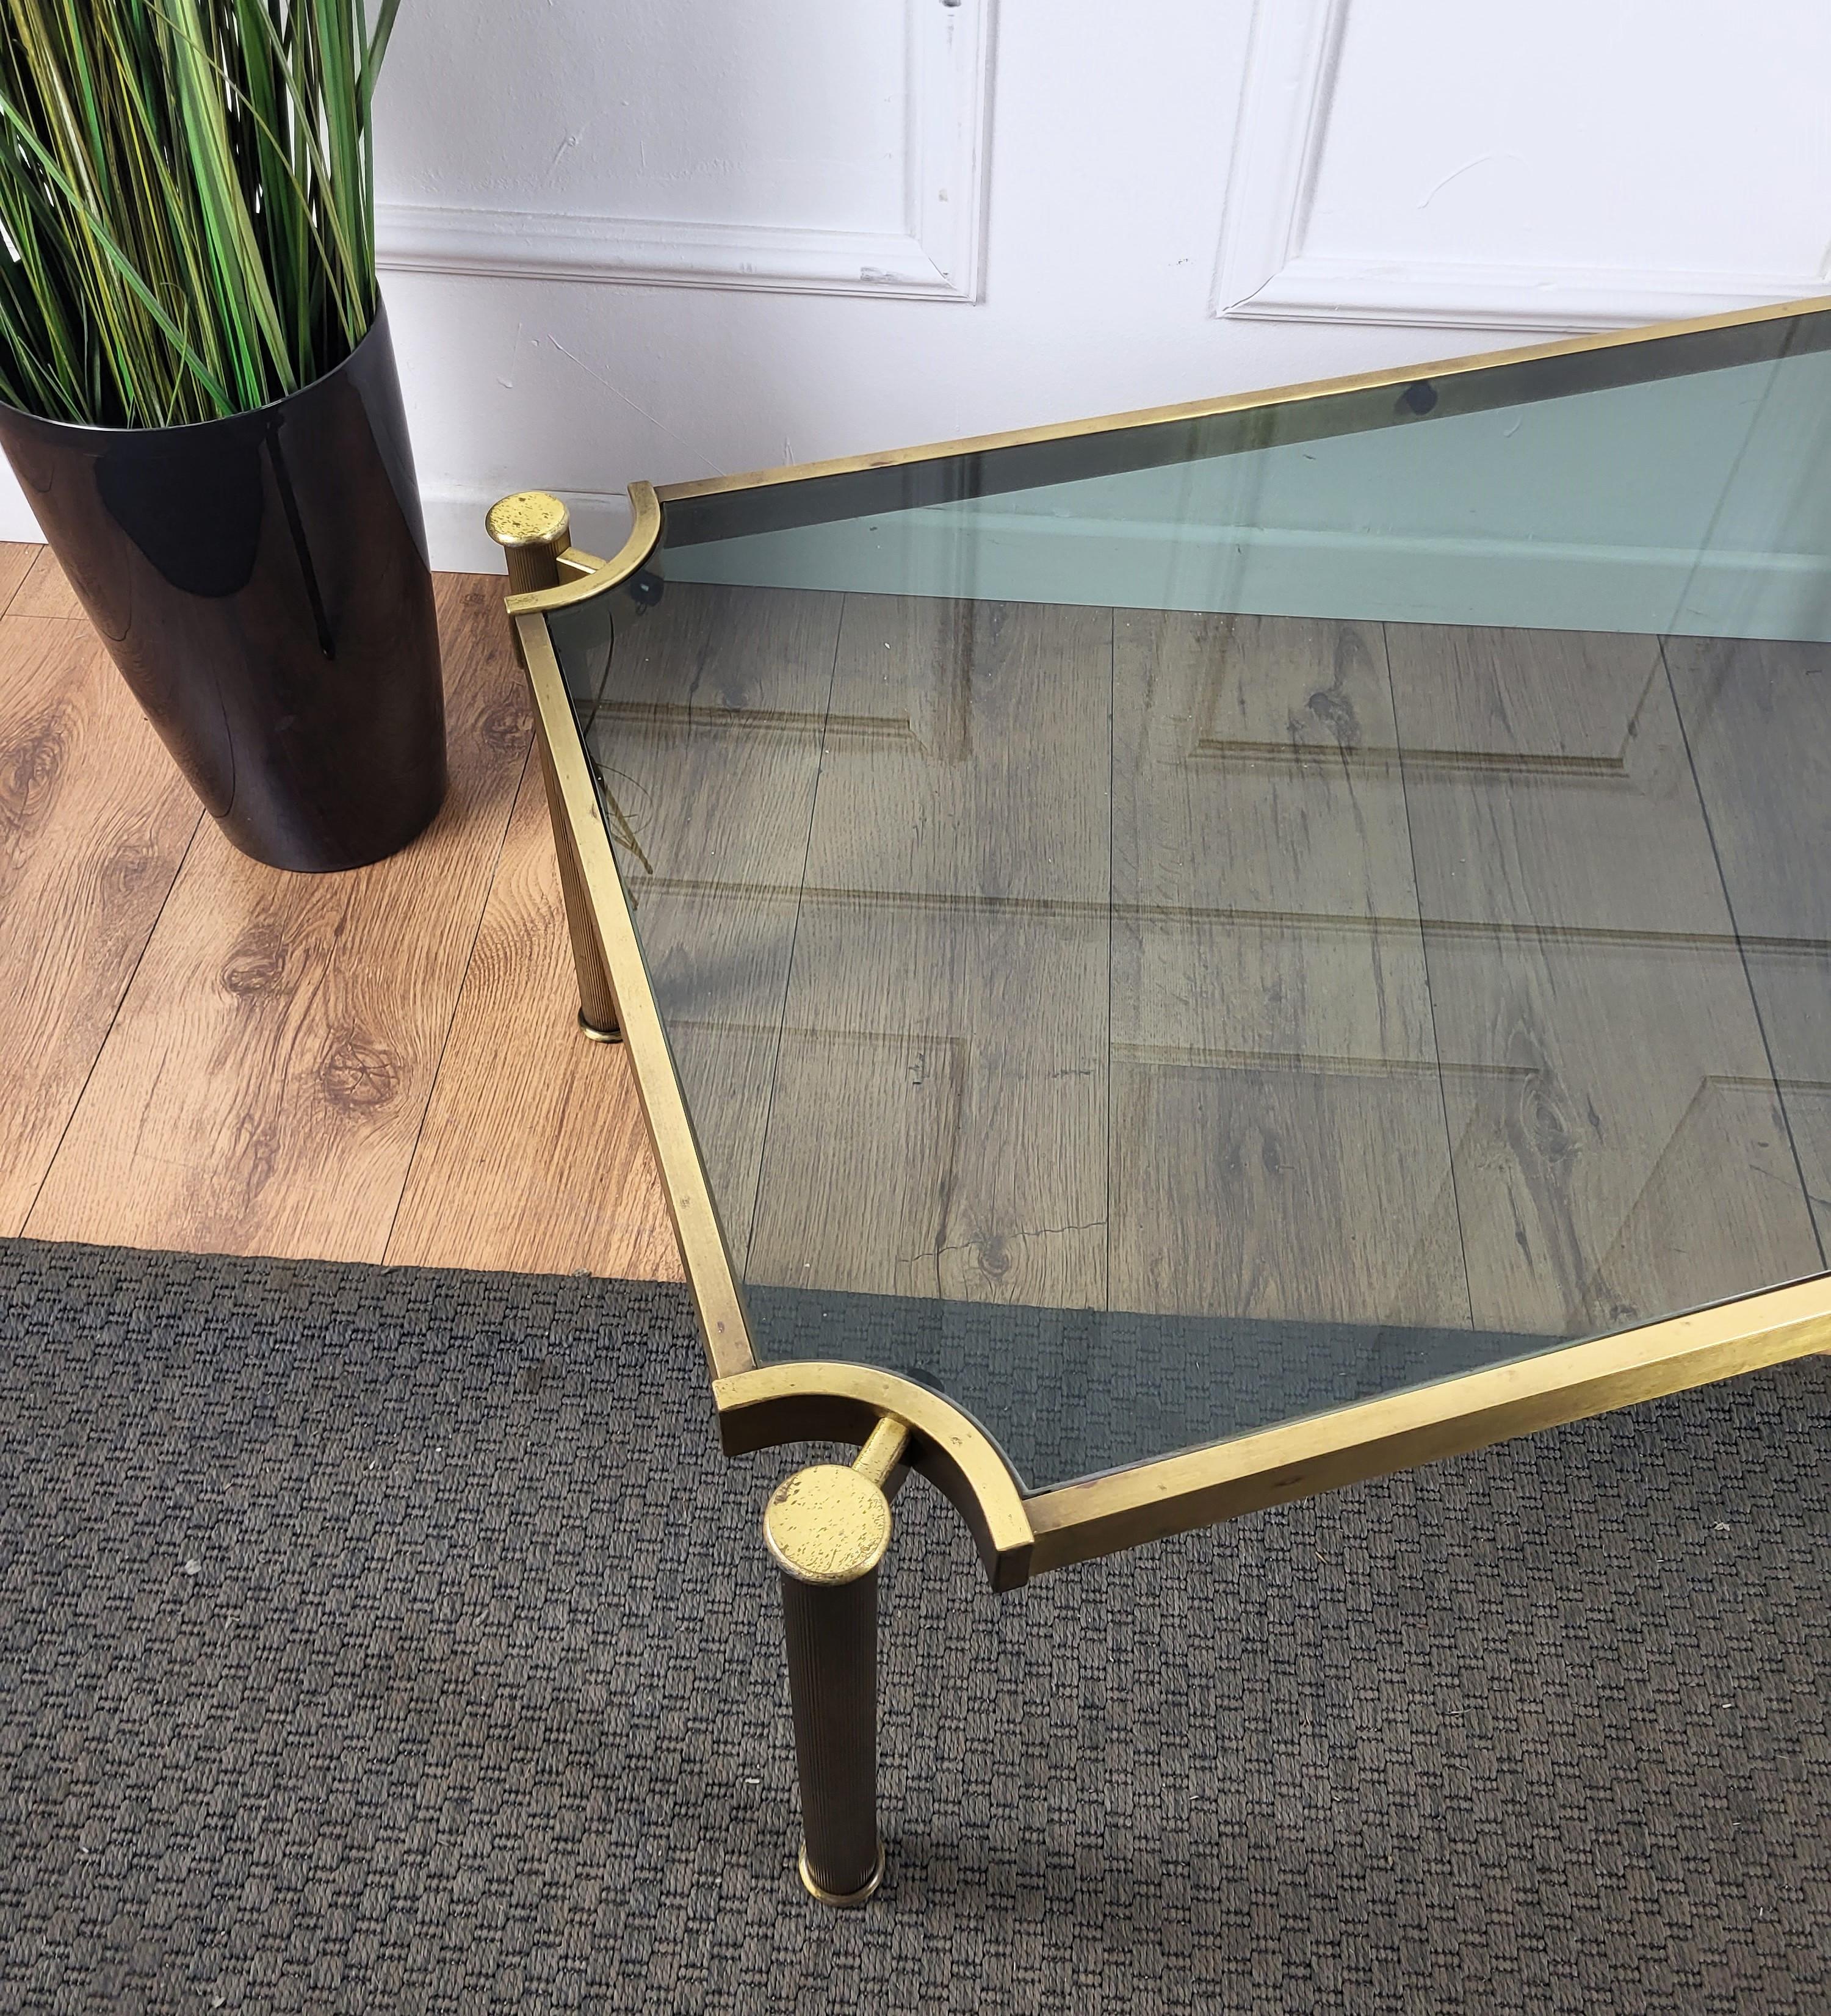 1980s Italian Mid-Century Regency Neoclassical Brass Smoked Glass Coffee Table For Sale 3